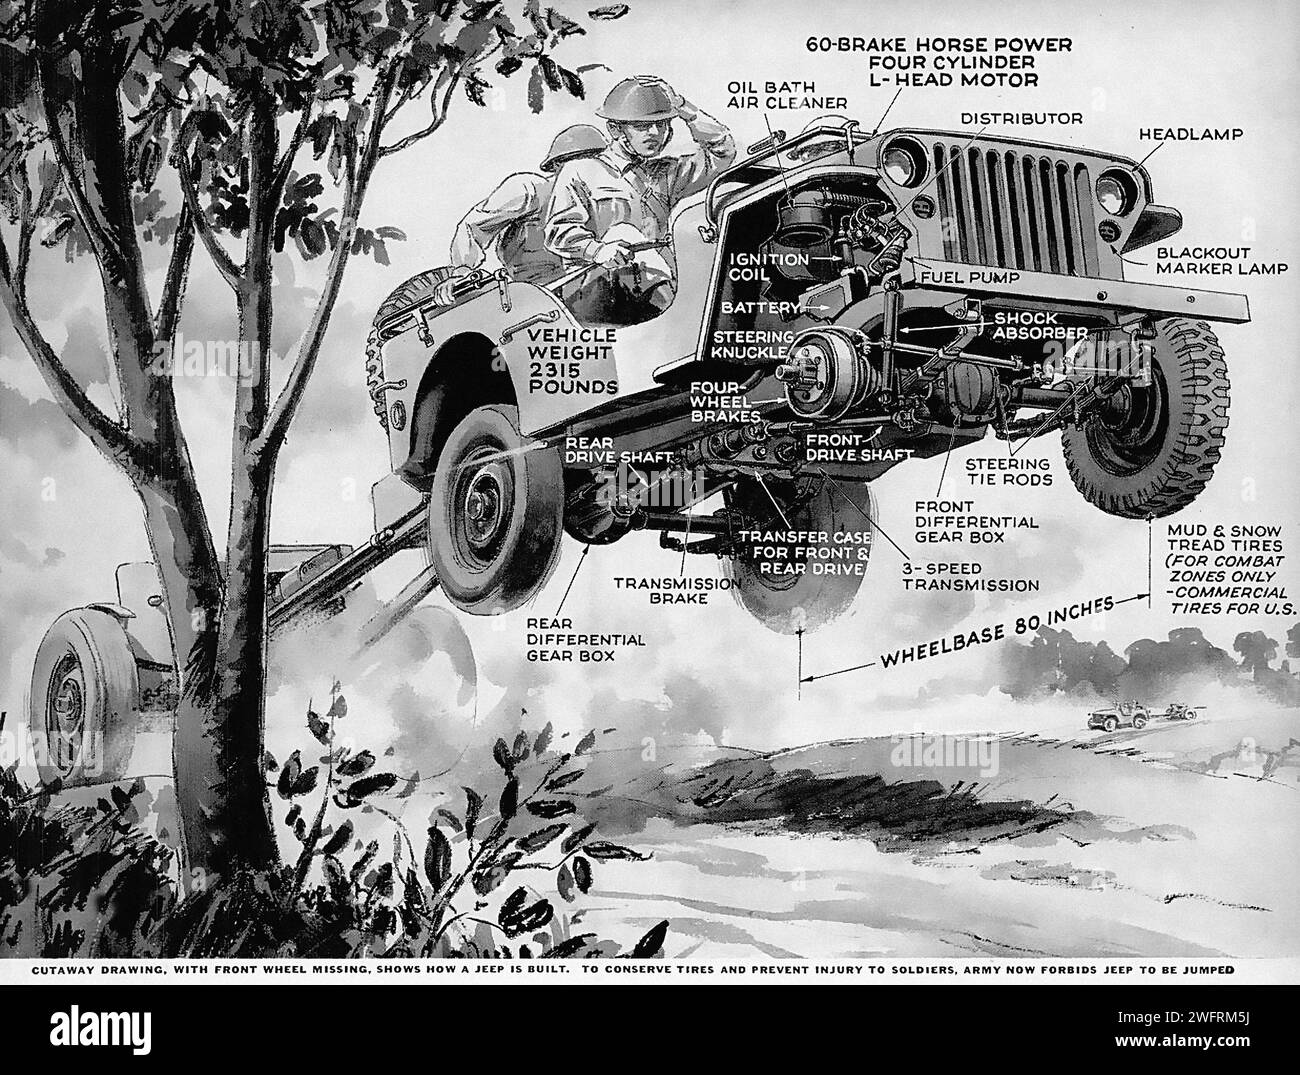 “CUTAWAY DRAWING, FRONT WHEEL DRIVE, MISSING, SHOWS A WILLYS MB JEEP, 1/4 TON 4X4, TO CONVEY TACTICS AND PREVENT INJURY TO SOLDIERS. ARMY JEEP SERIES REDESIGNED TO BE JUMPED FROM AIRPLANES.”  This is a black and white cutaway drawing of a Willys MB Jeep, a four-wheel drive utility vehicle used during World War II. The jeep is depicted driving through a muddy terrain with trees and bushes in the background. The image showcases various parts of the jeep, such as the oil bath air cleaner, distributor, and transmission gear box. The graphic style of the image is technical and detailed, characteris Stock Photo